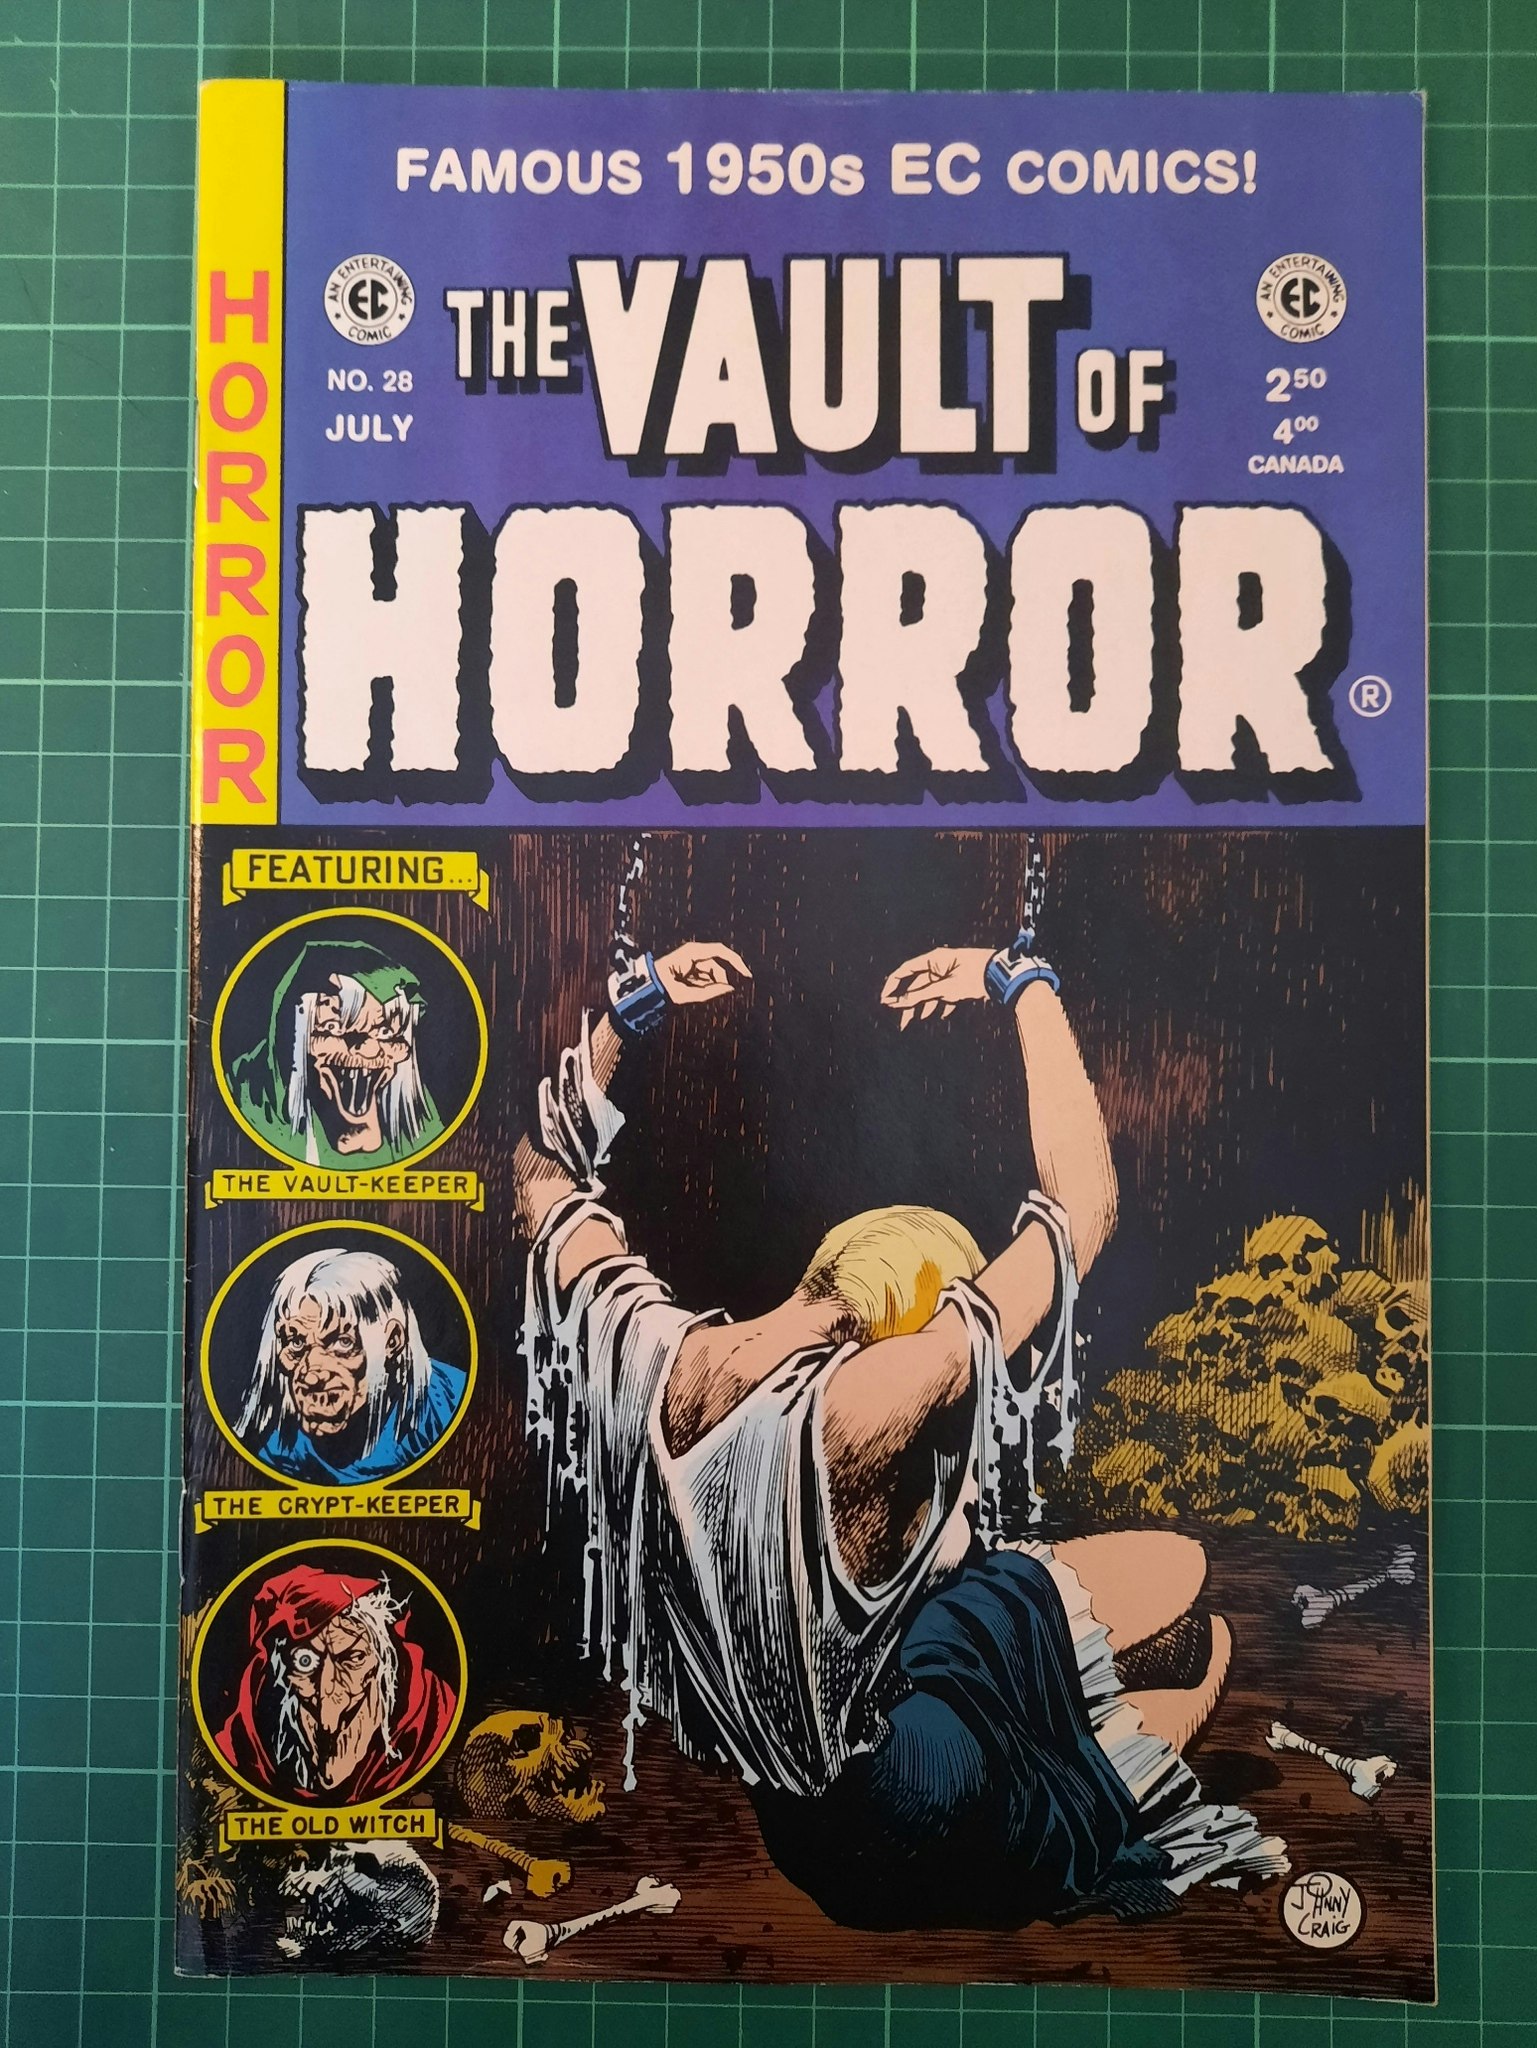 The vault of horror #28